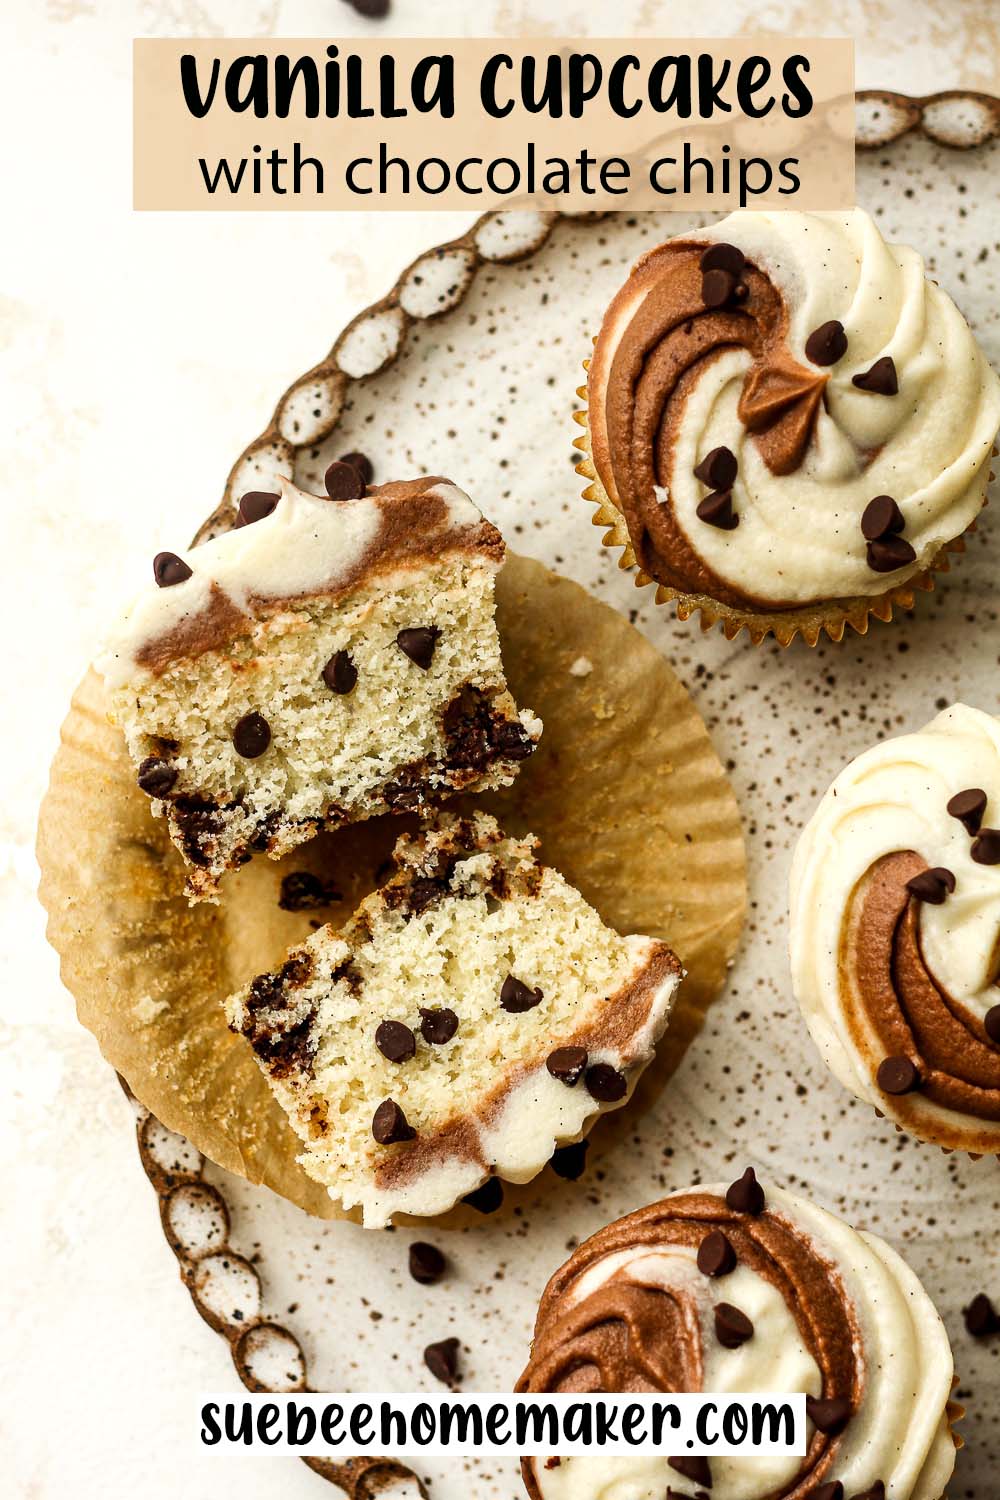 A plate of vanilla cupcakes with chocolate chips and one cut open showing the inside.